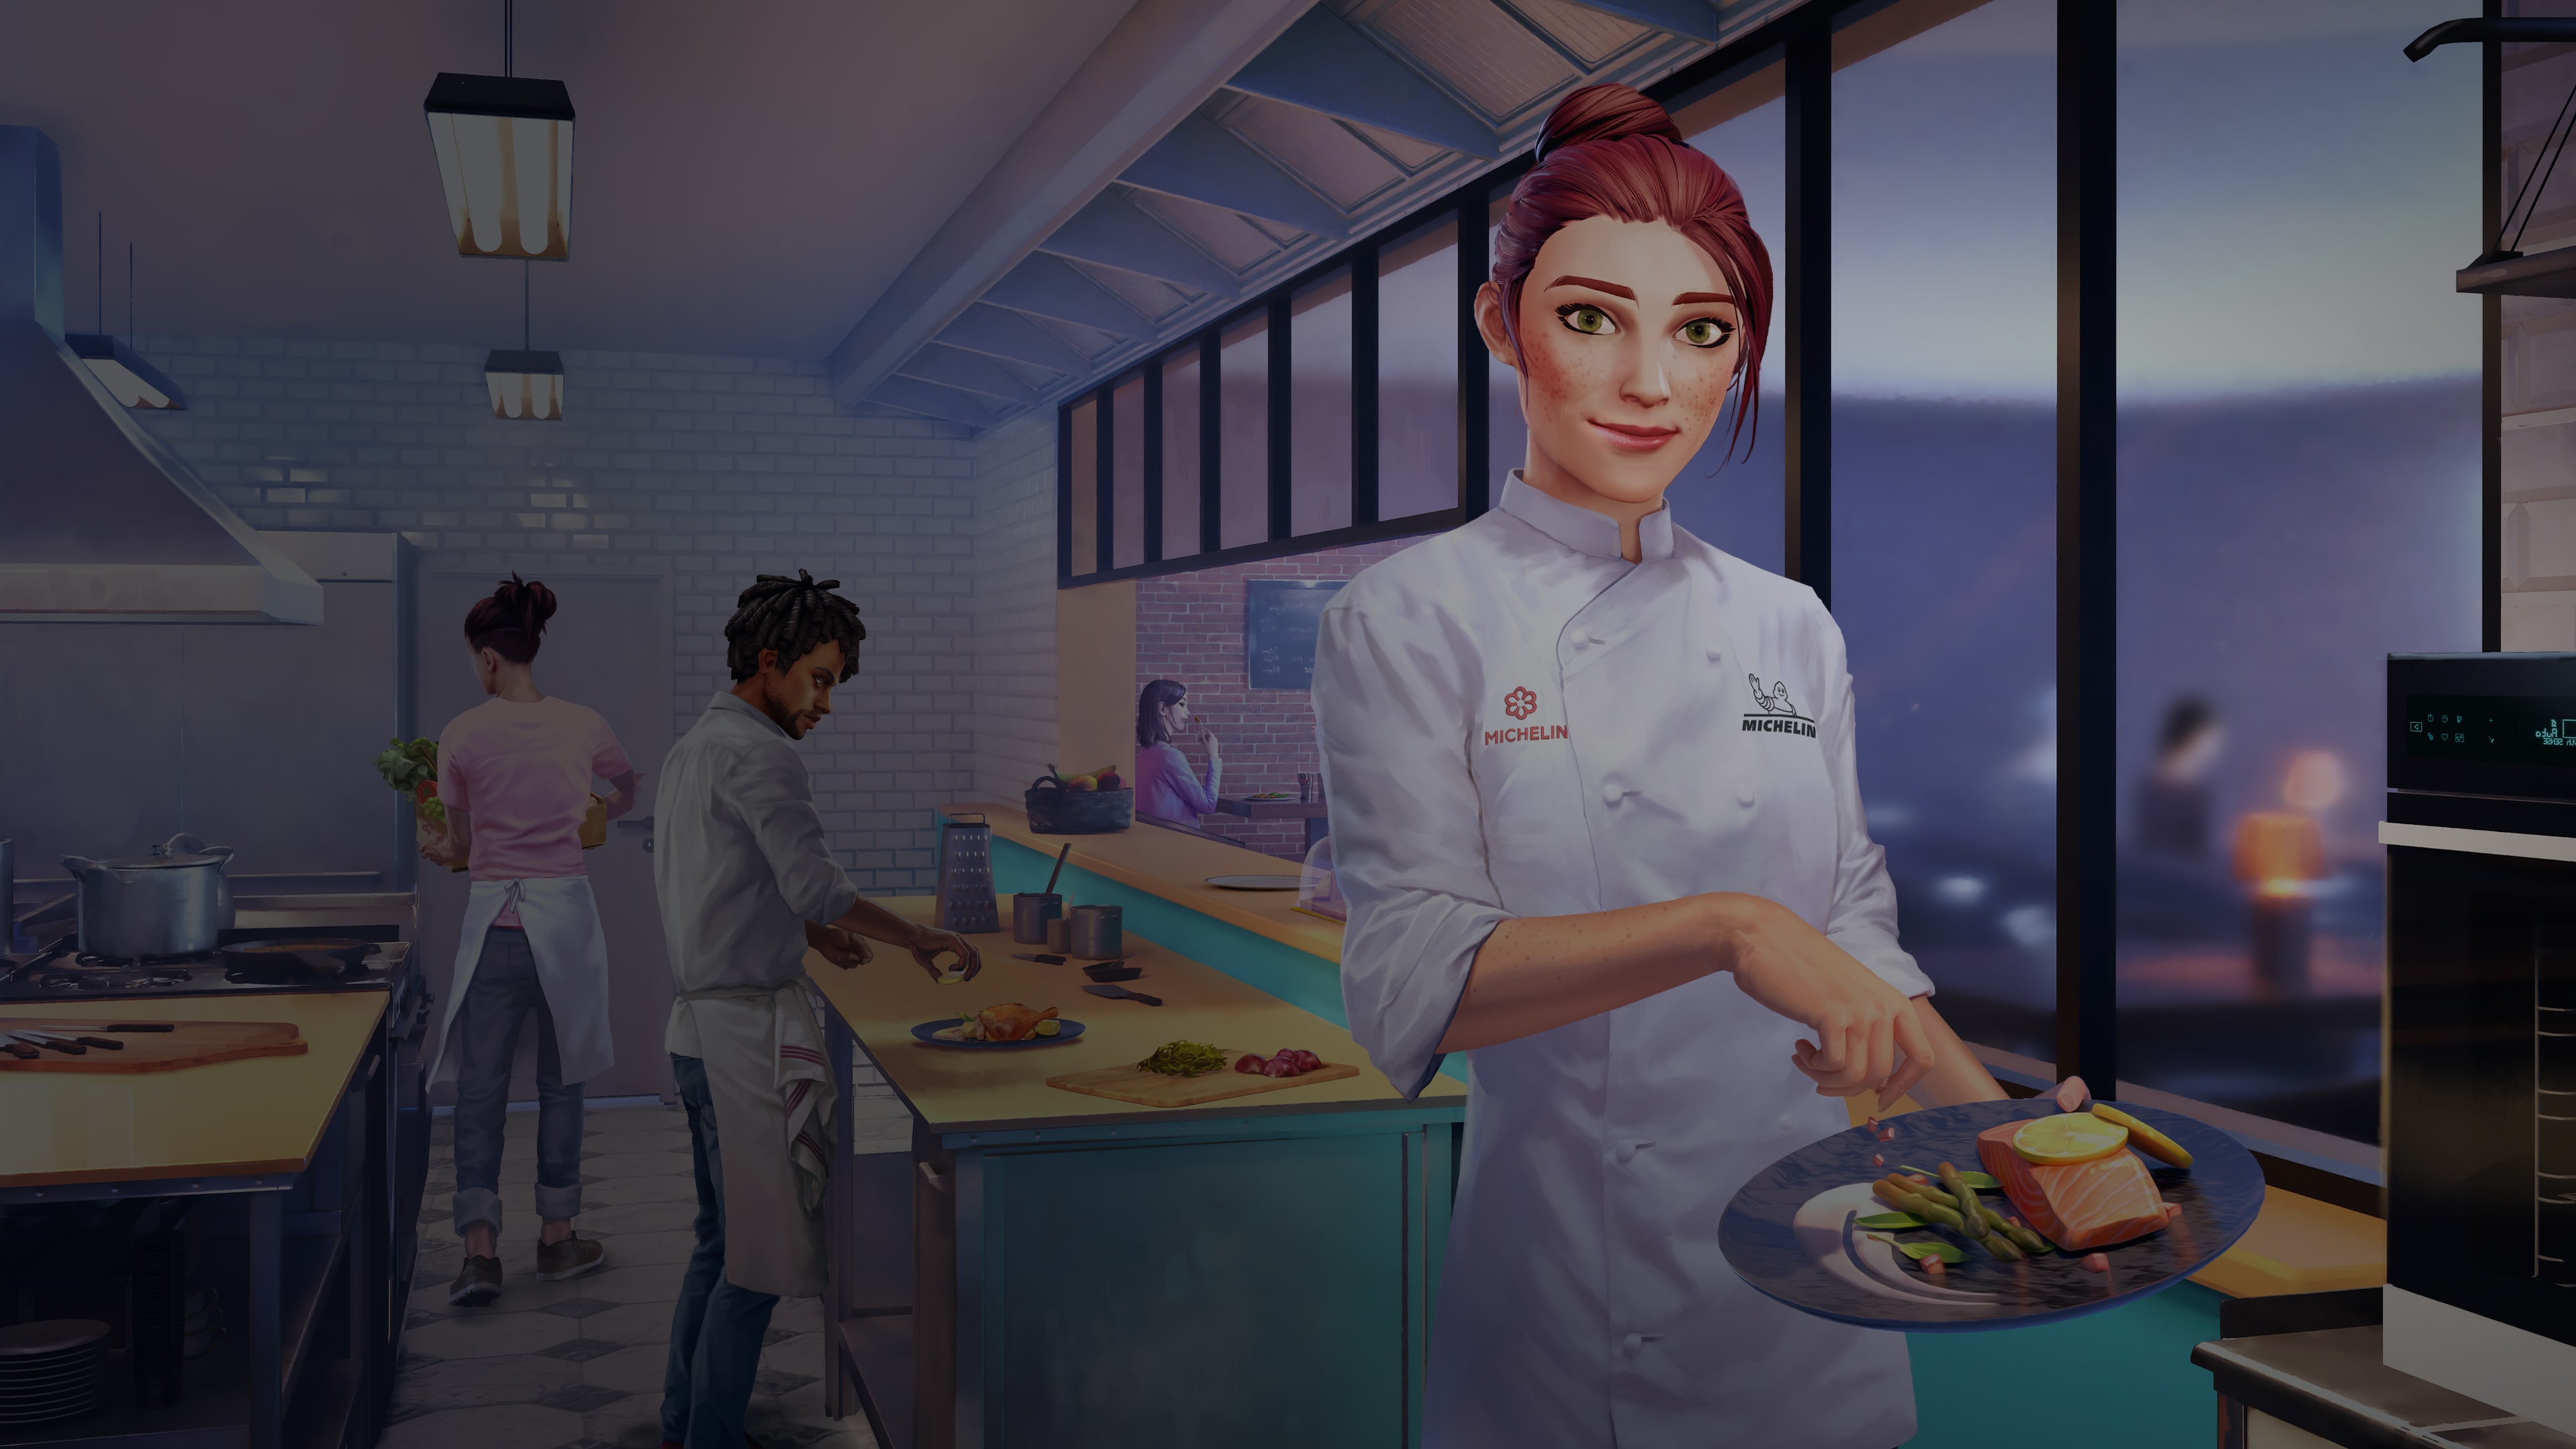 Chef Life - A Restaurant Simulator (Simplified Chinese, English, Korean, Japanese, Traditional Chinese)